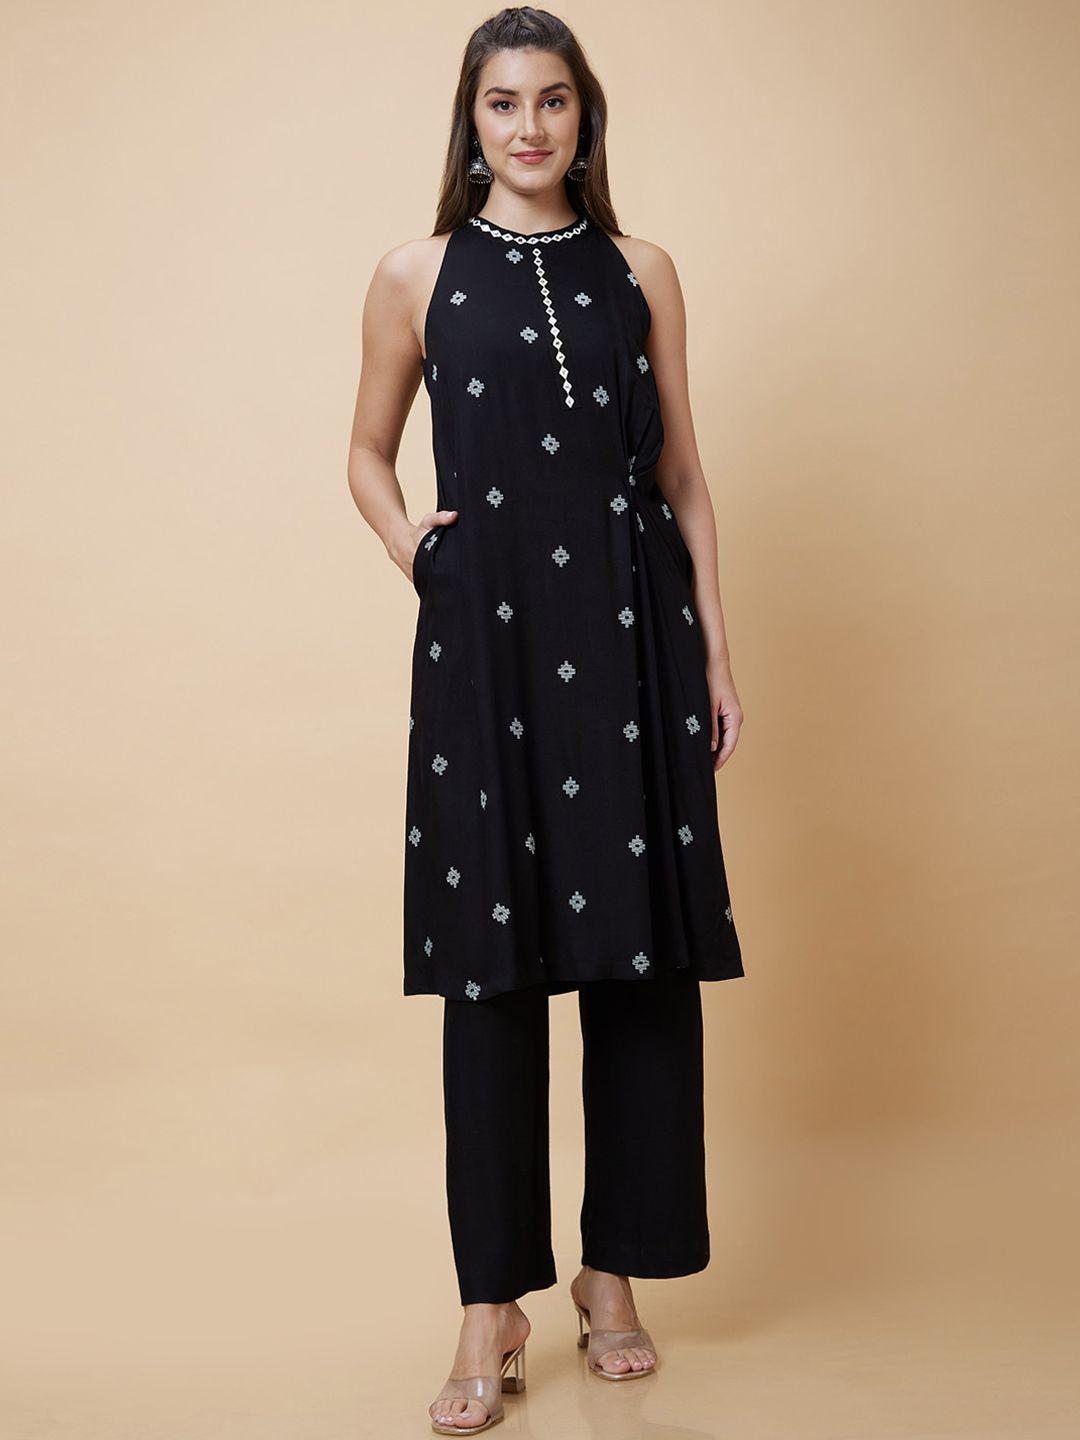 globus-black-ethnic-motifs-embroidered-mirror-work-a-line-kurta-with-trousers